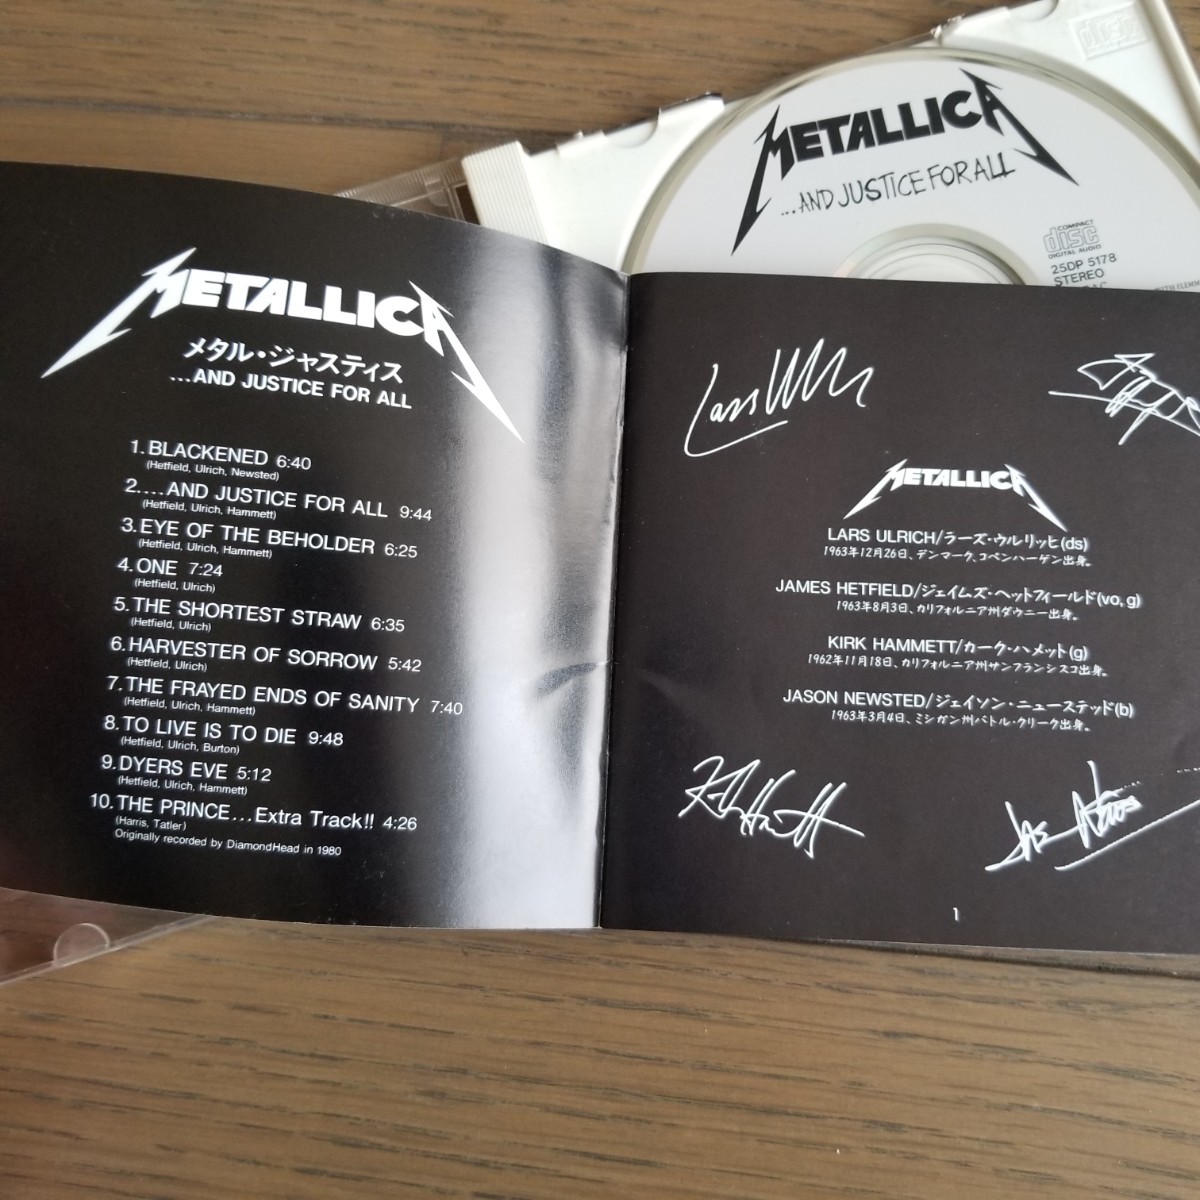 ★METALLICA「… AND JUSTICE FOR ALL」国内盤アルバム メタリカ メタルジャスティス